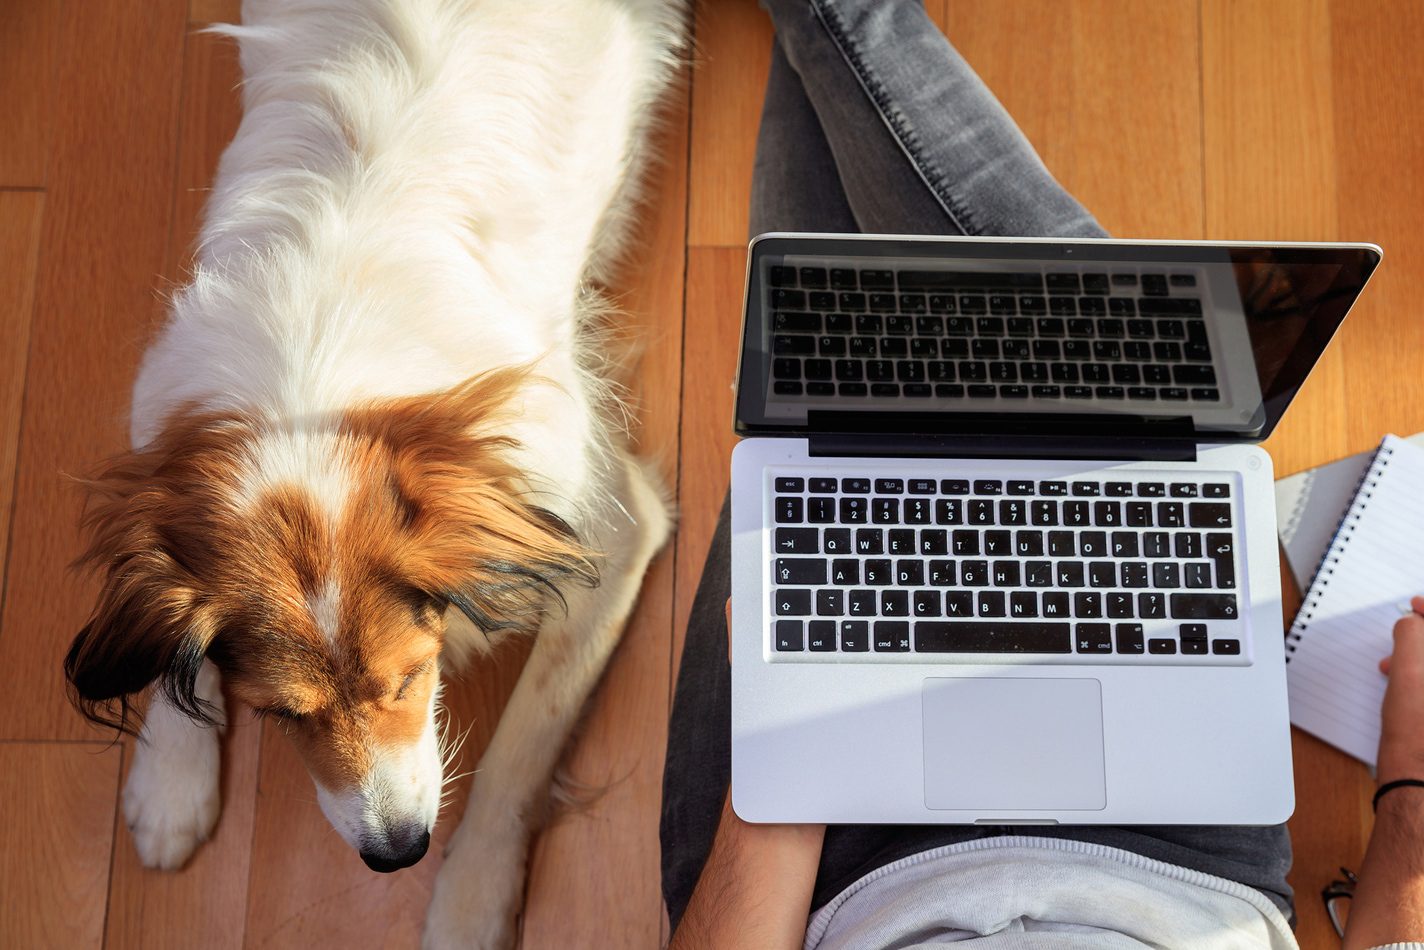 Take Your Dog to Work: Practical Tips